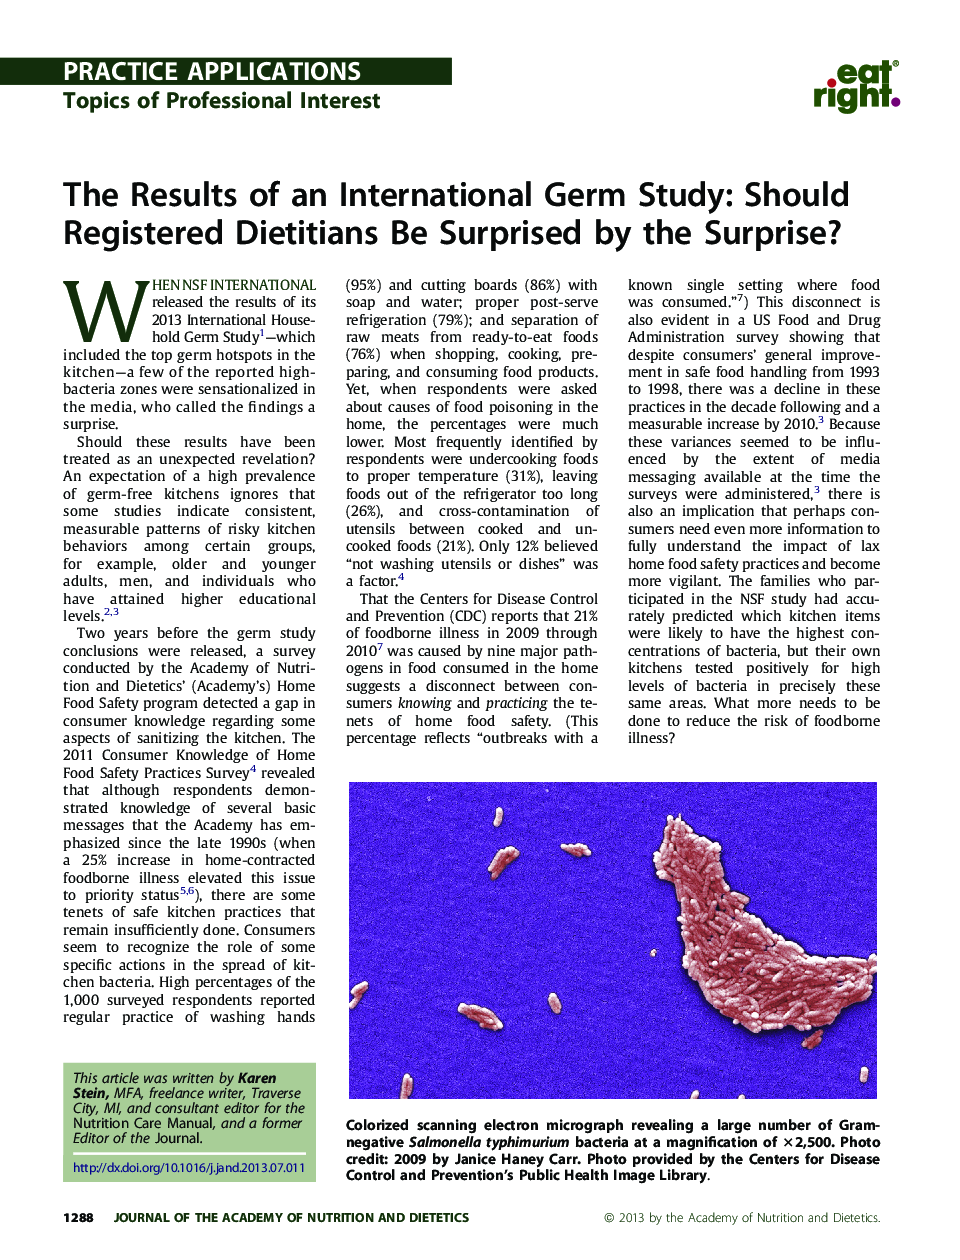 The Results of an International Germ Study: Should Registered Dietitians Be Surprised by the Surprise?